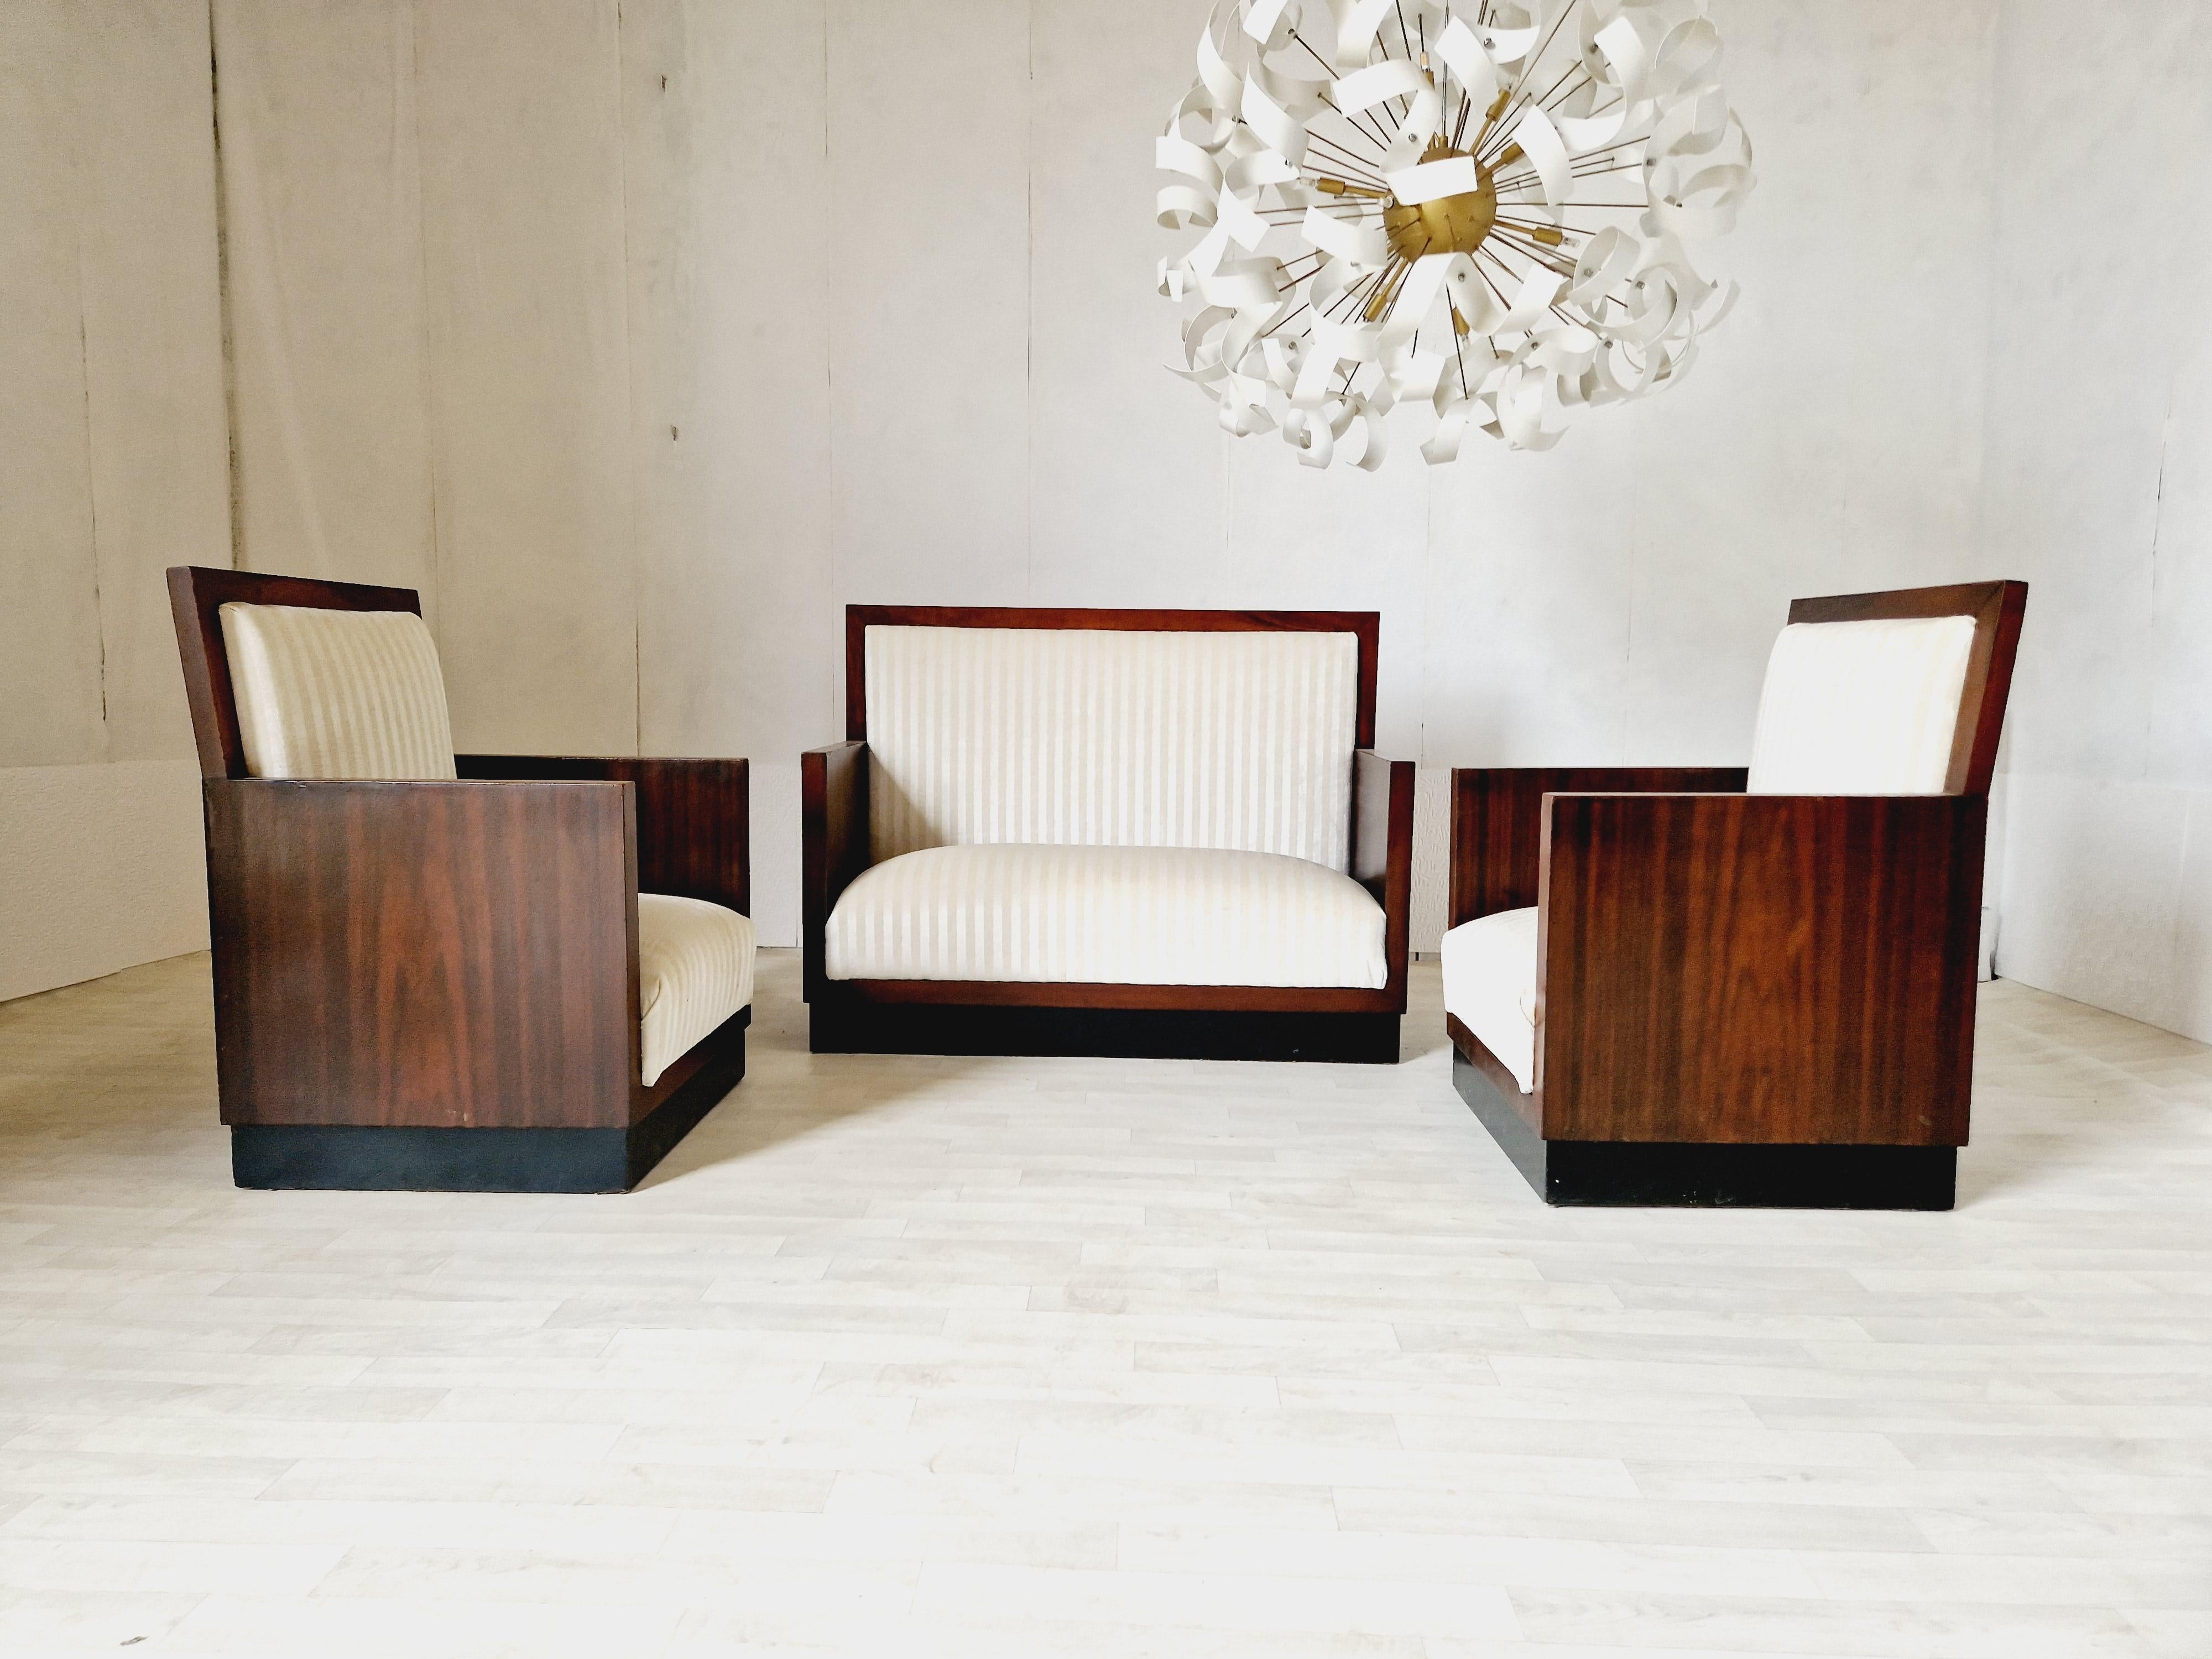 This vintage Art Deco living room set from the 1930s features a beautiful cube style design with a cream colour finish and Rosewood veneer. This set includes three chairs made of Rosewood and upholstered with luxurious chenille fabric. The chairs